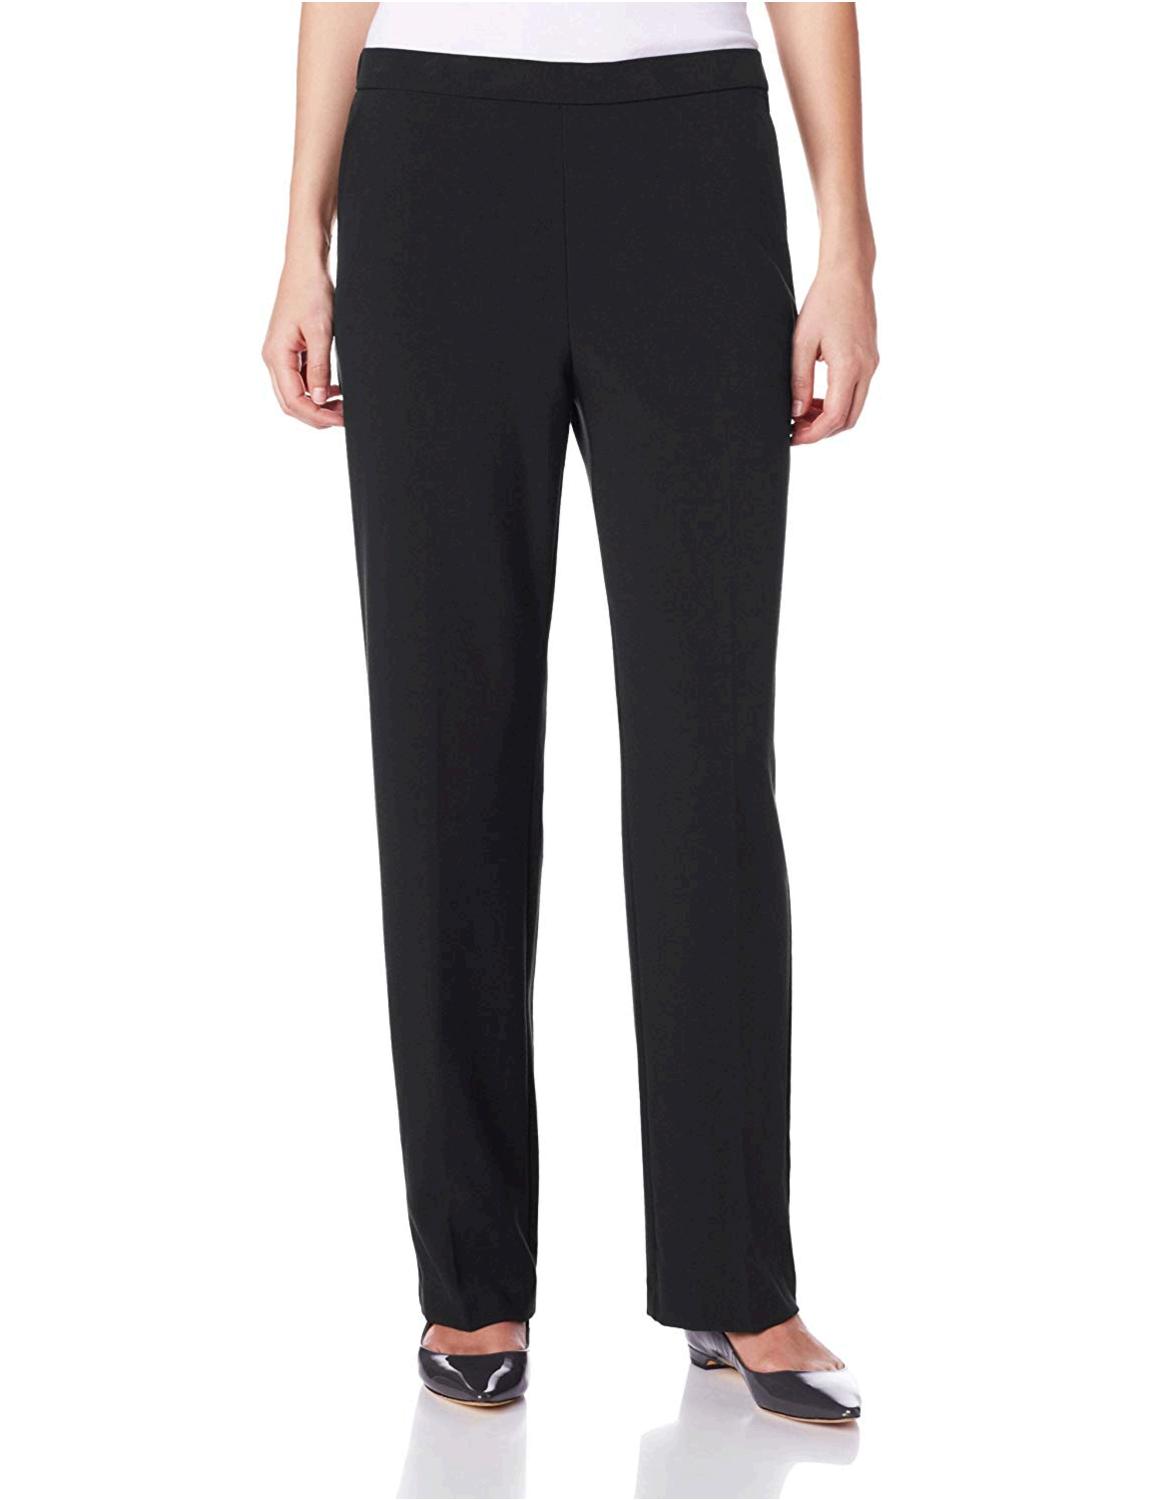 Briggs New York Women's Flat Front Pull On Pant with Slimming, Black ...